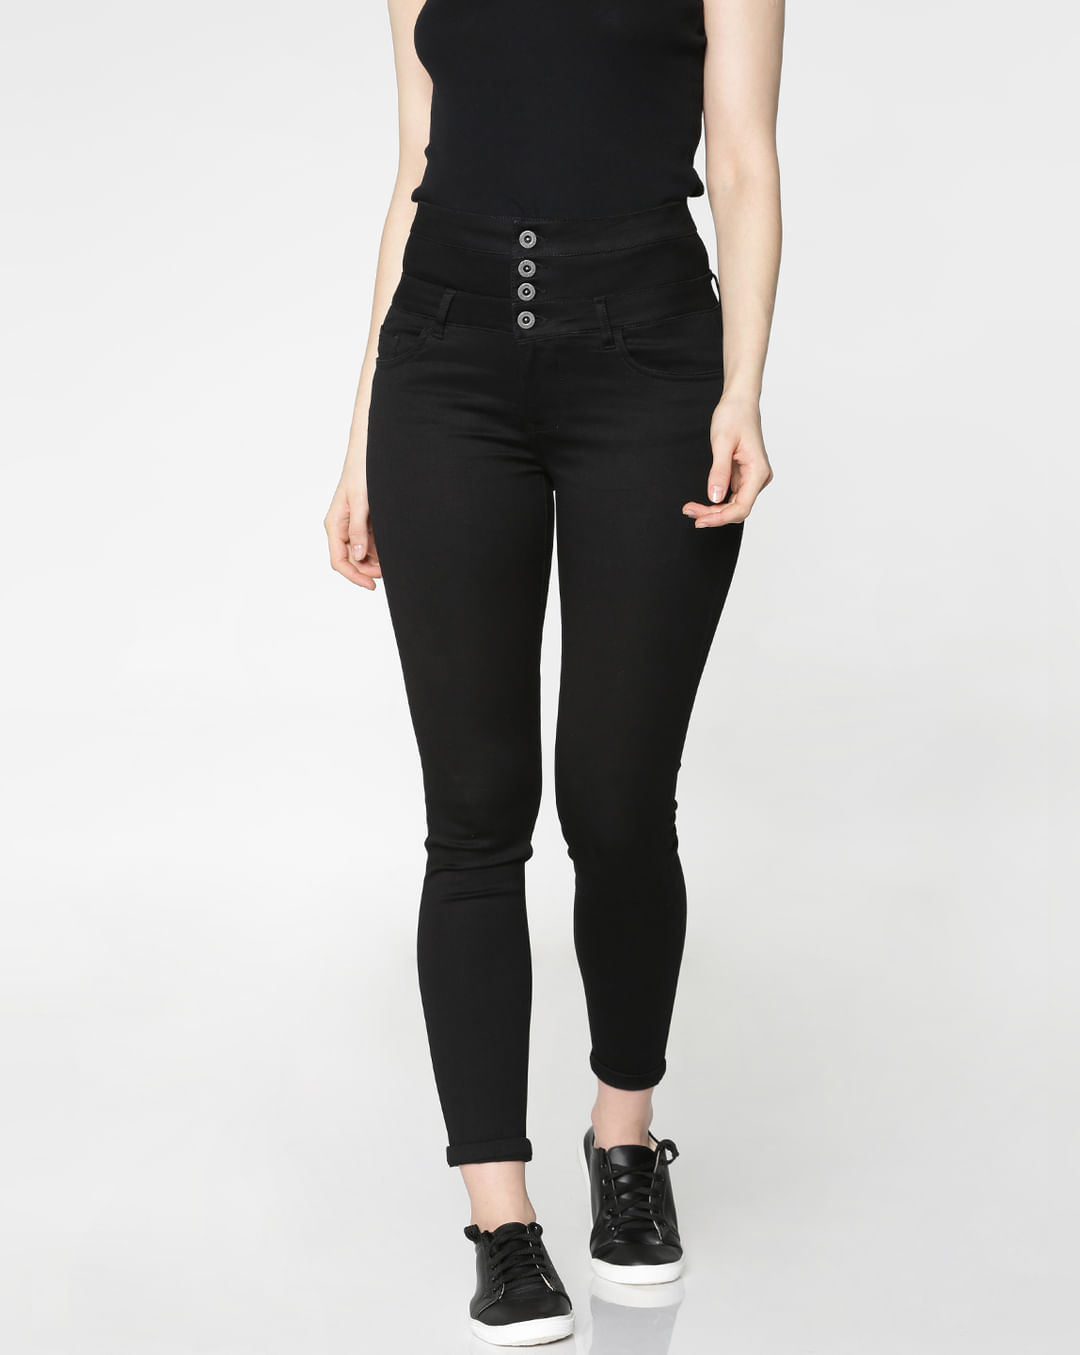 Buy Black High Waist Ankle Length Skinny Fit Jeggings | ONLY | 204065101